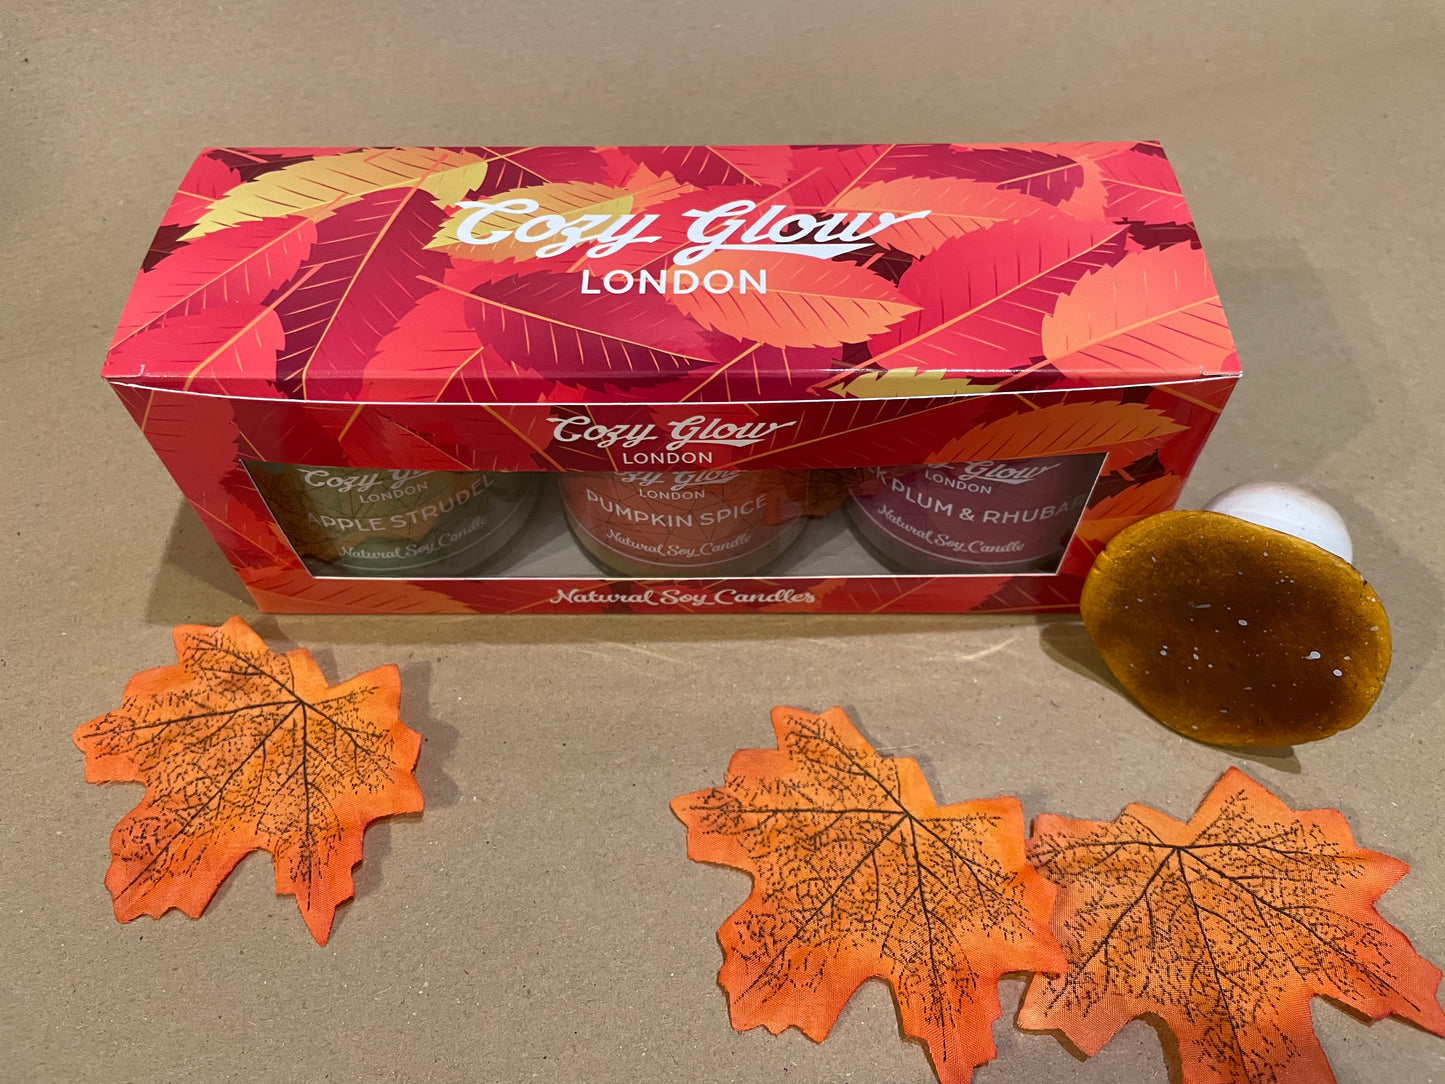 Cozy Glow Autumn Soy Candle Gift Collection